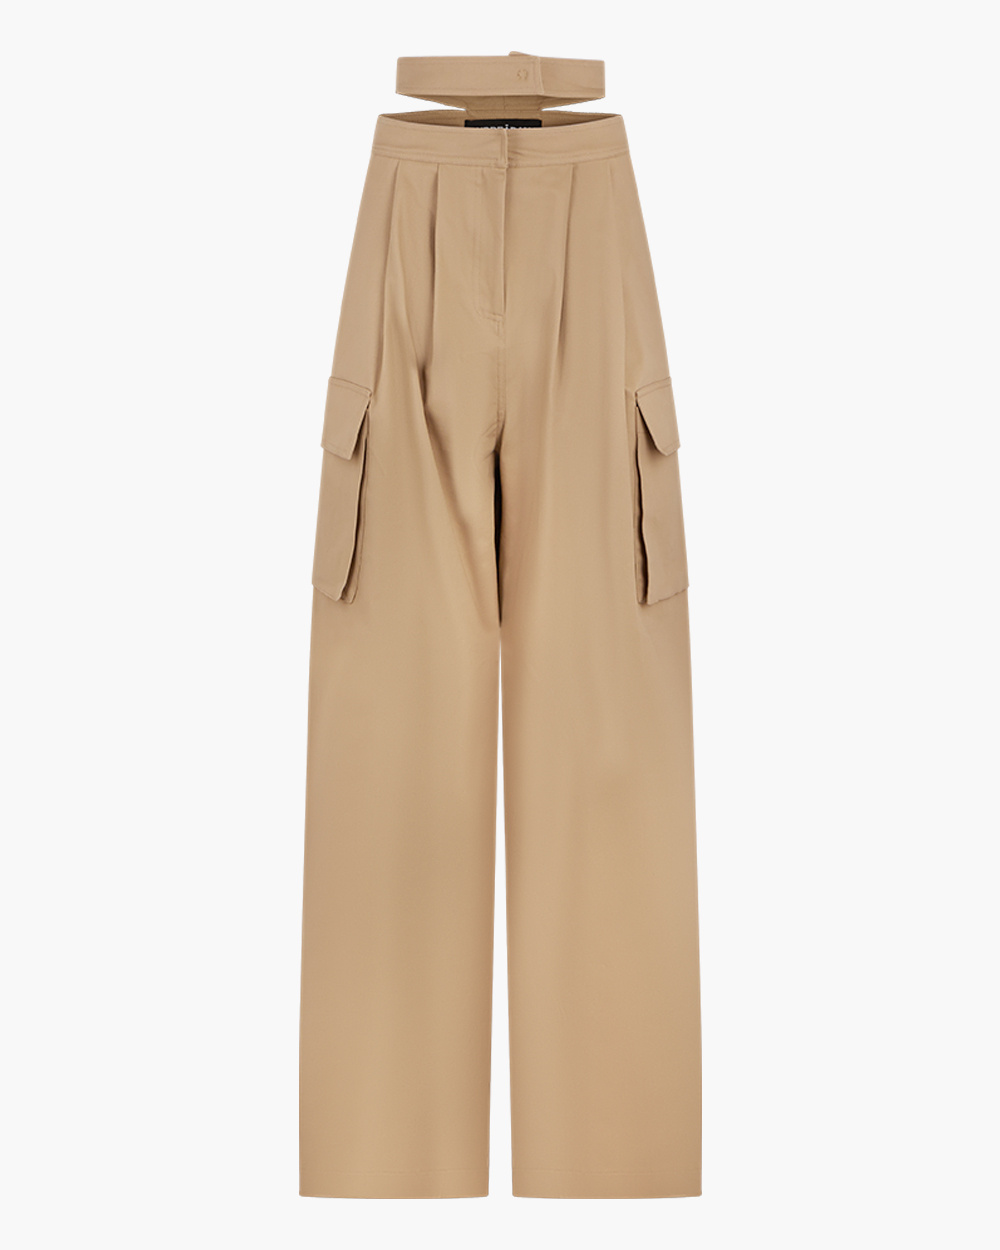 TROUSERS WITH DOUBLE BELT BEIGE